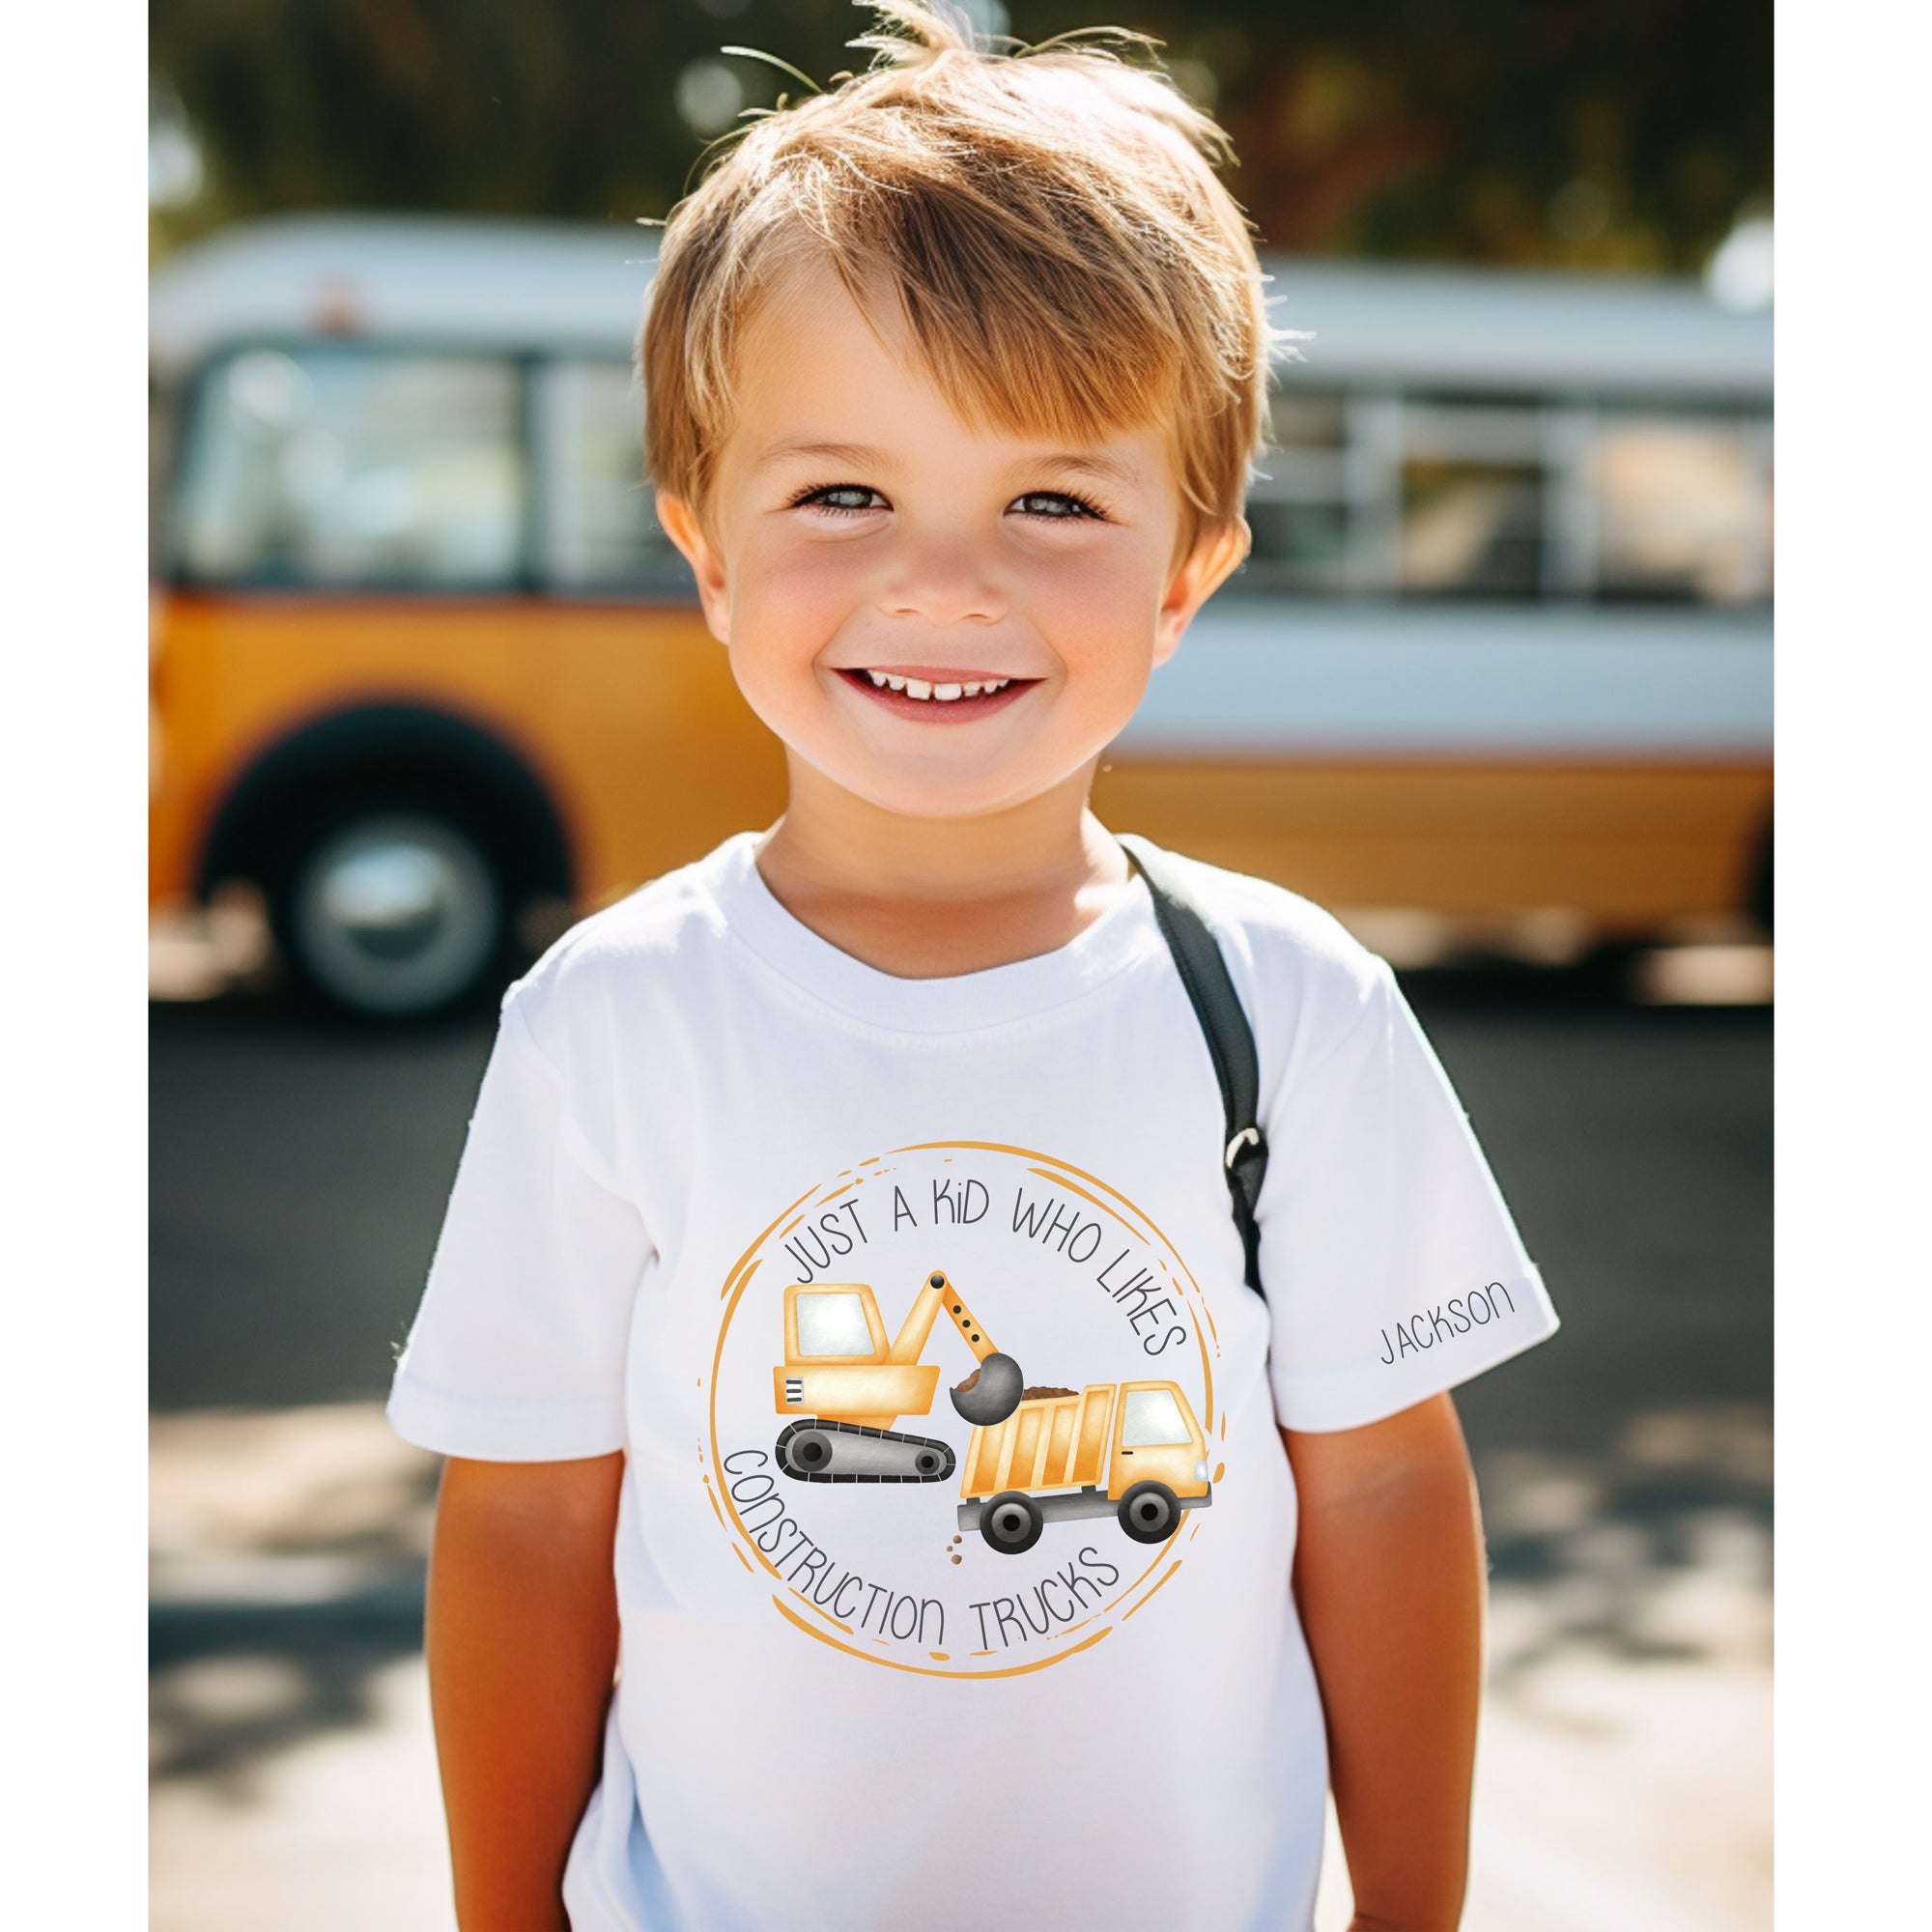 Just a Kid who likes CONSTRUCTION TRUCKS - Personalized Apparel